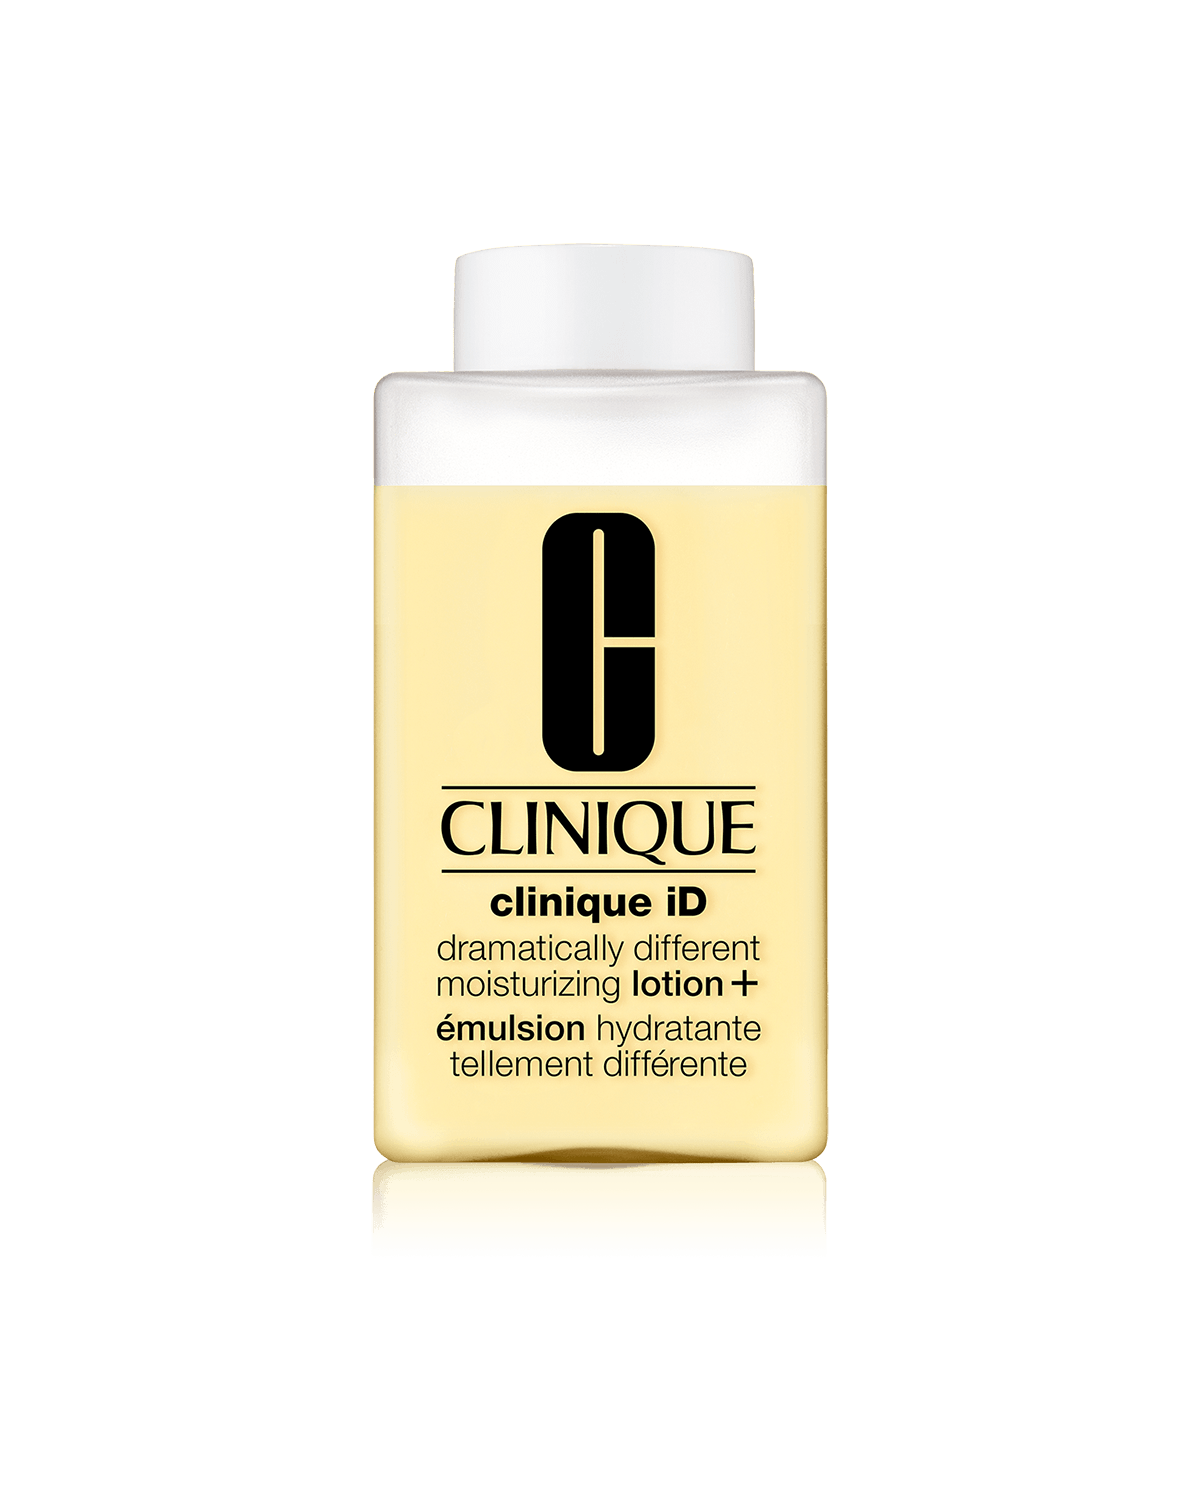 Clinique iD™: Dramatically Different Moisturizing Lotion+™